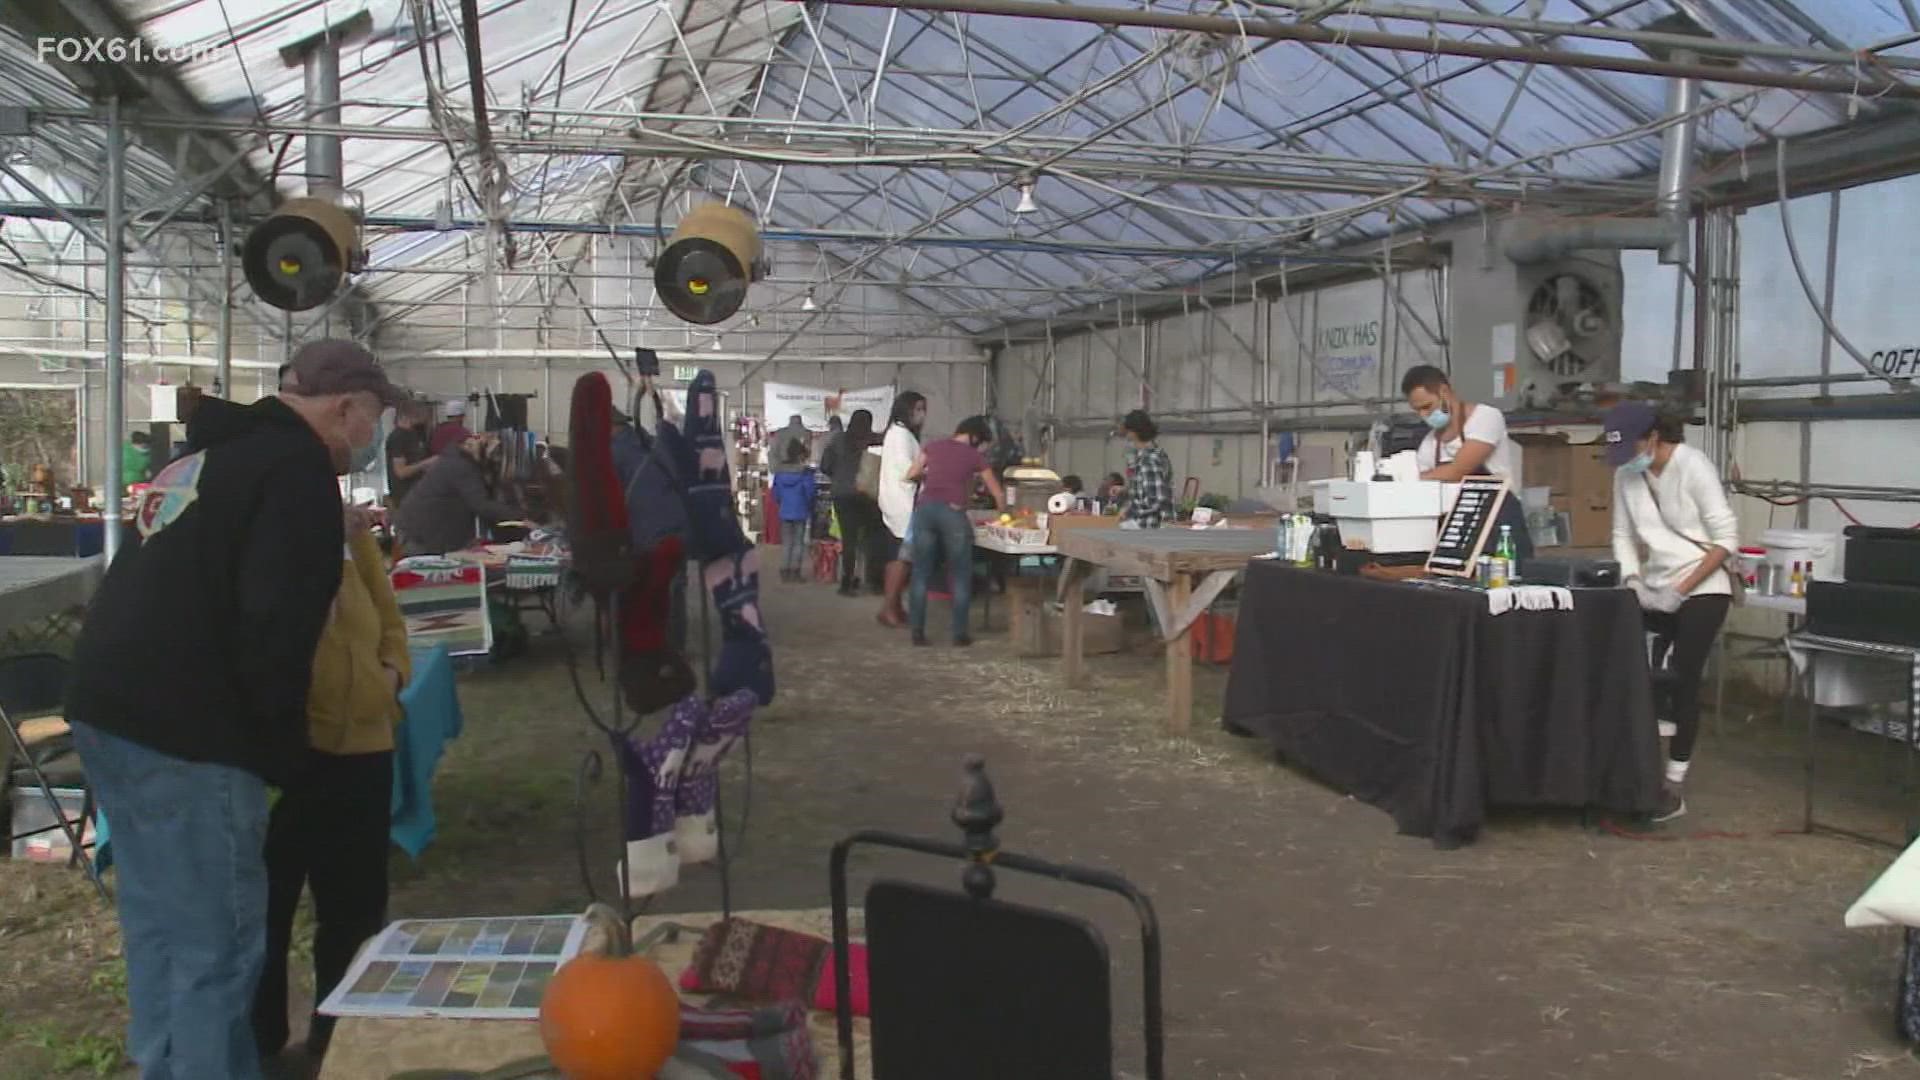 Nearly two dozen vendors participated, offering local produce, baked goods, and hand-made items.